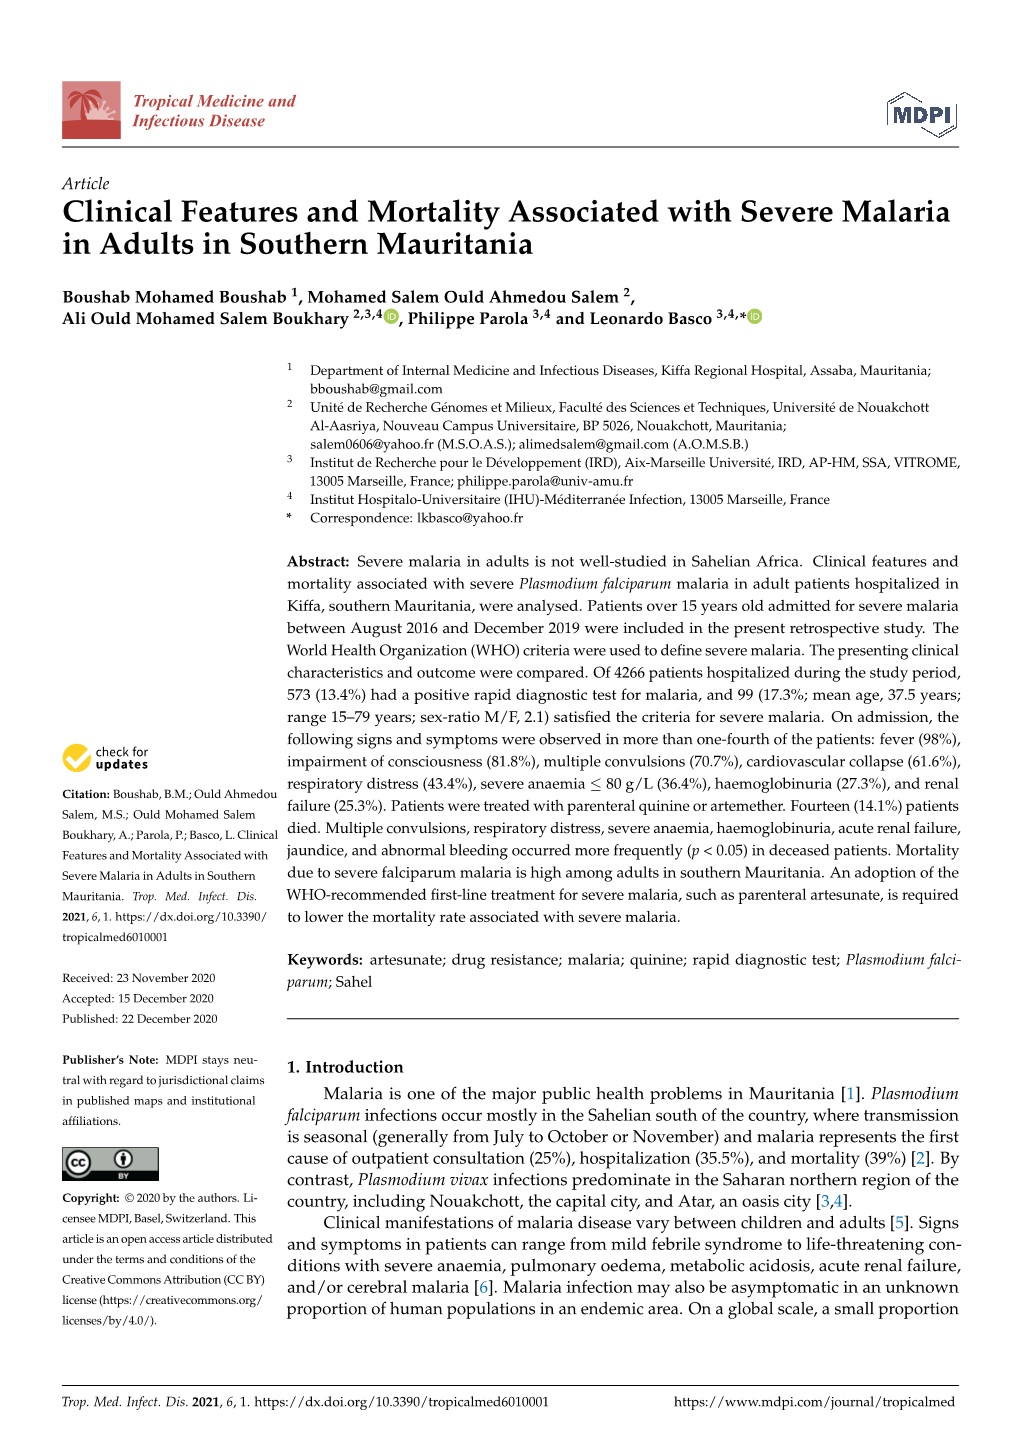 Clinical Features and Mortality Associated with Severe Malaria in Adults in Southern Mauritania